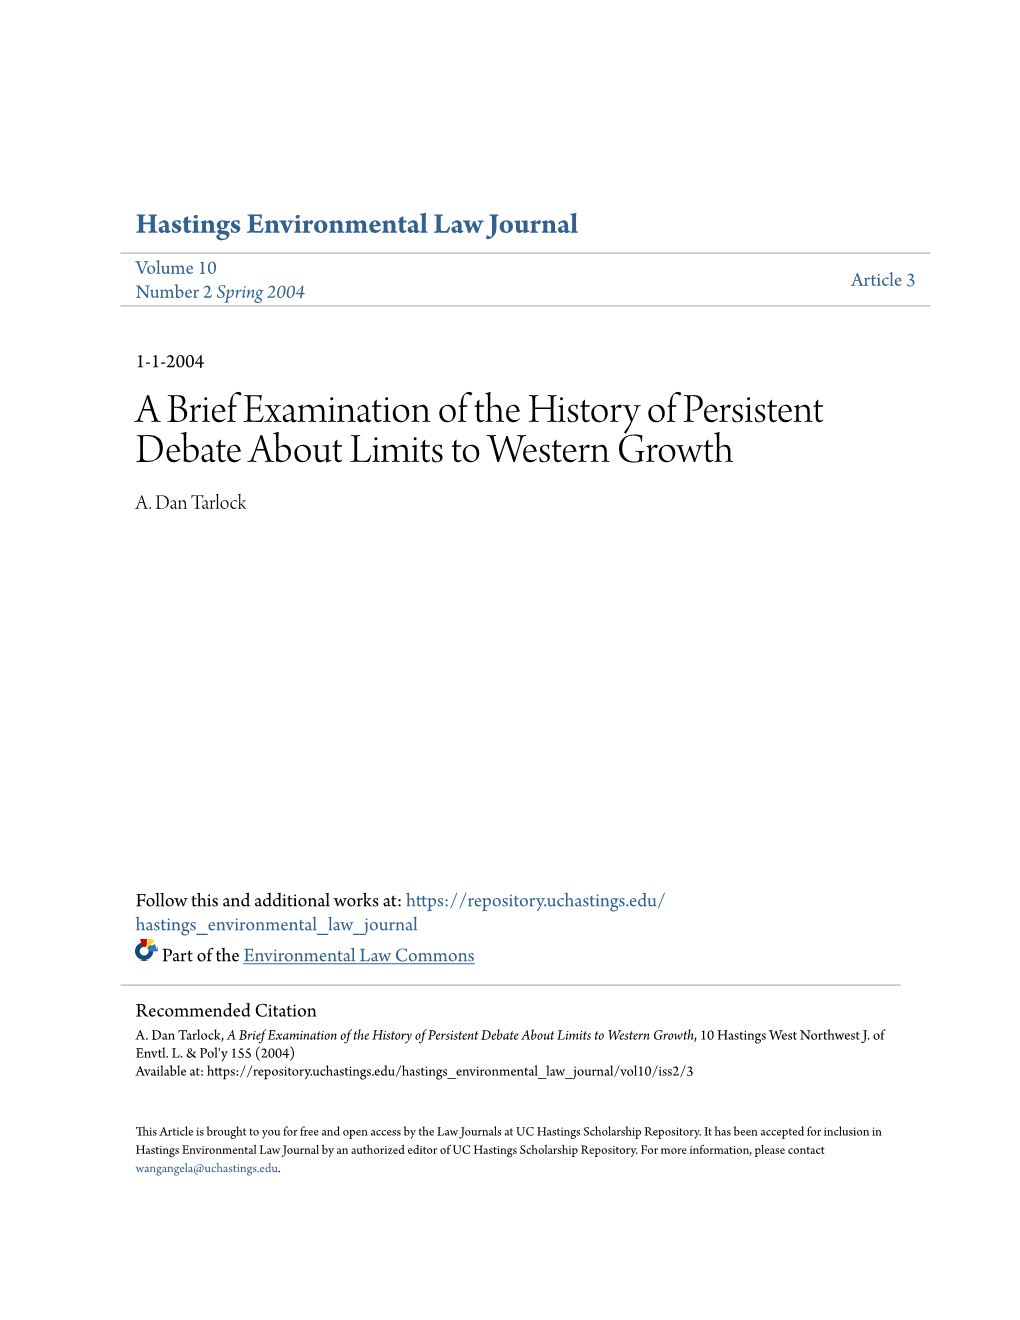 A Brief Examination of the History of Persistent Debate About Limits to Western Growth A